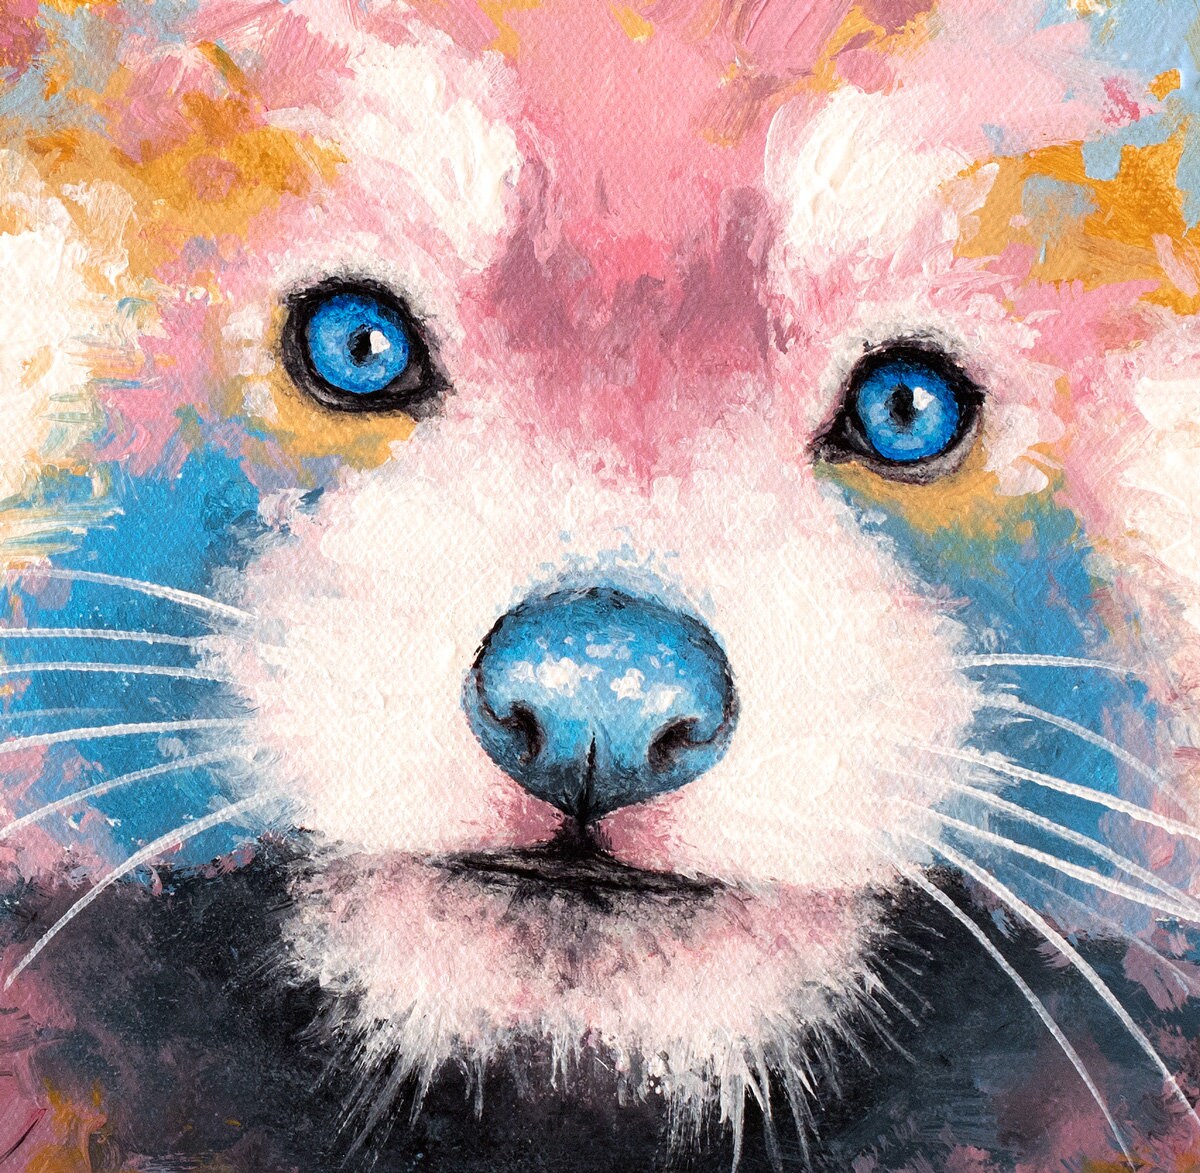 Red Panda Art Print - Wall Decor for Gifts, Nursery, Office on CANVAS or PAPER. Red Panda Painting by Krystle Cole